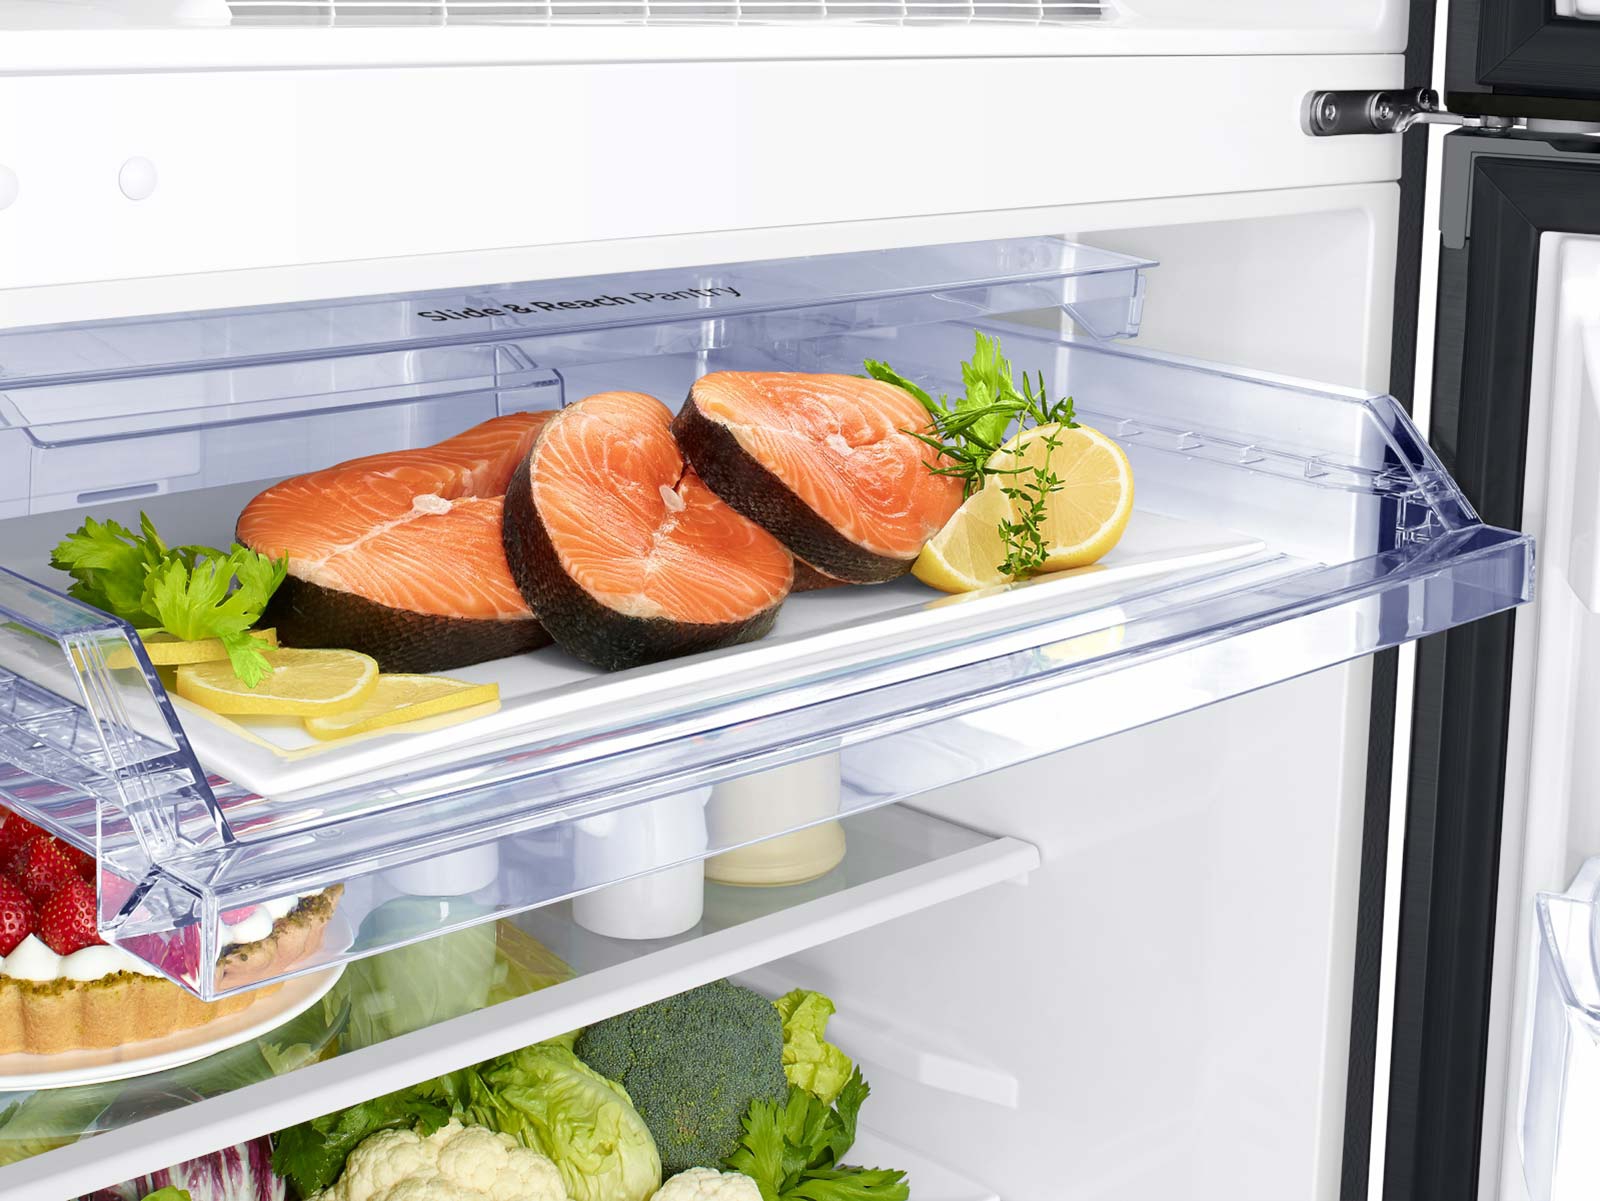 Thumbnail image of 18 cu. ft. Top Freezer Refrigerator with FlexZone™ in Black Stainless Steel